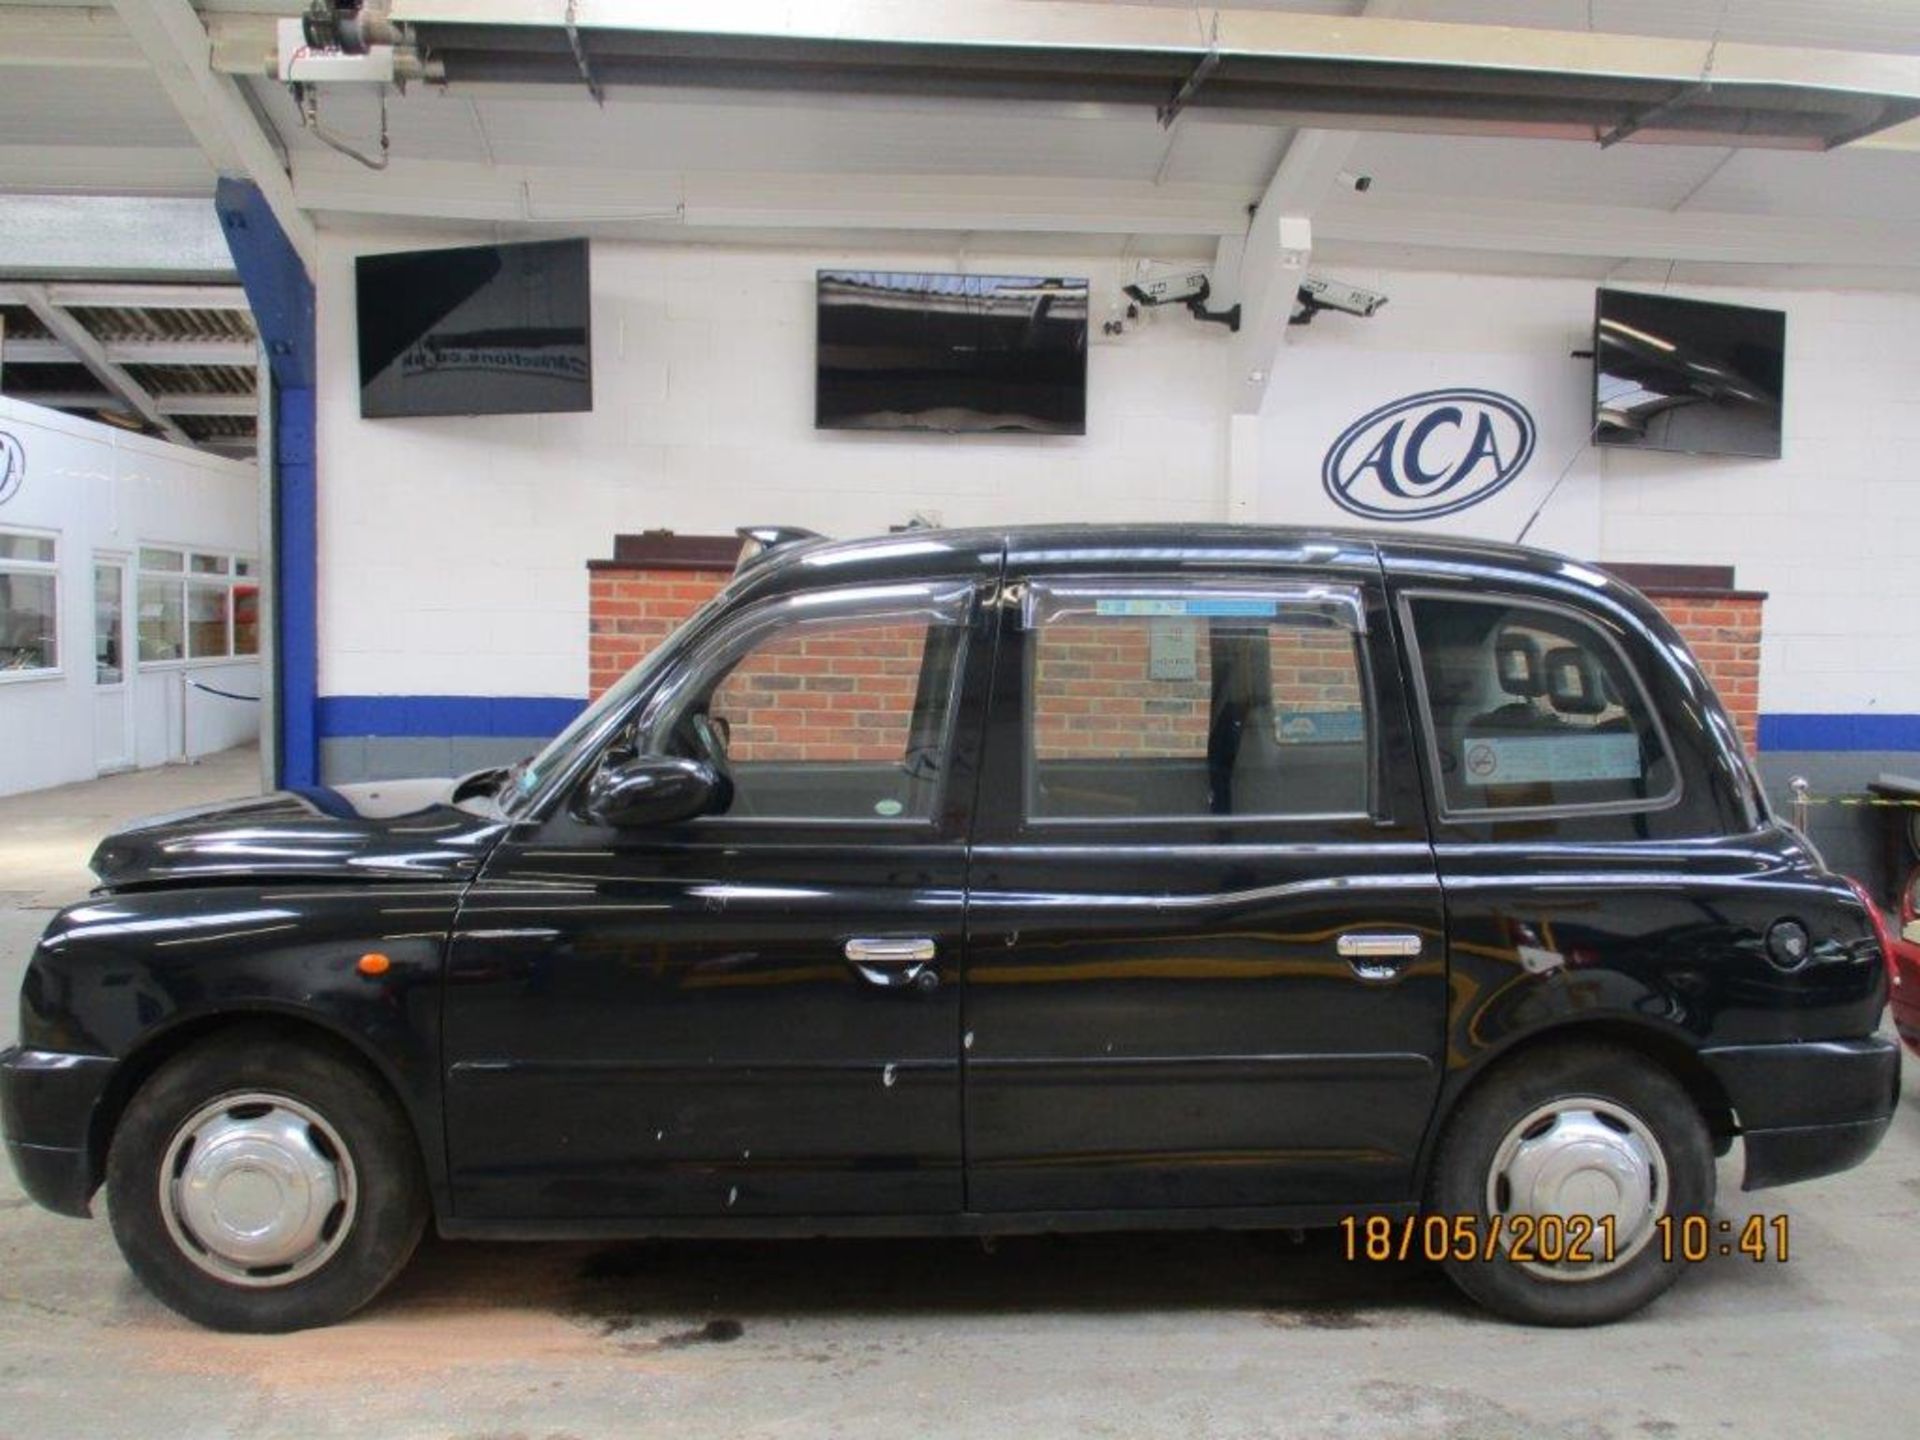 59 09 London Taxis Int - Image 3 of 15